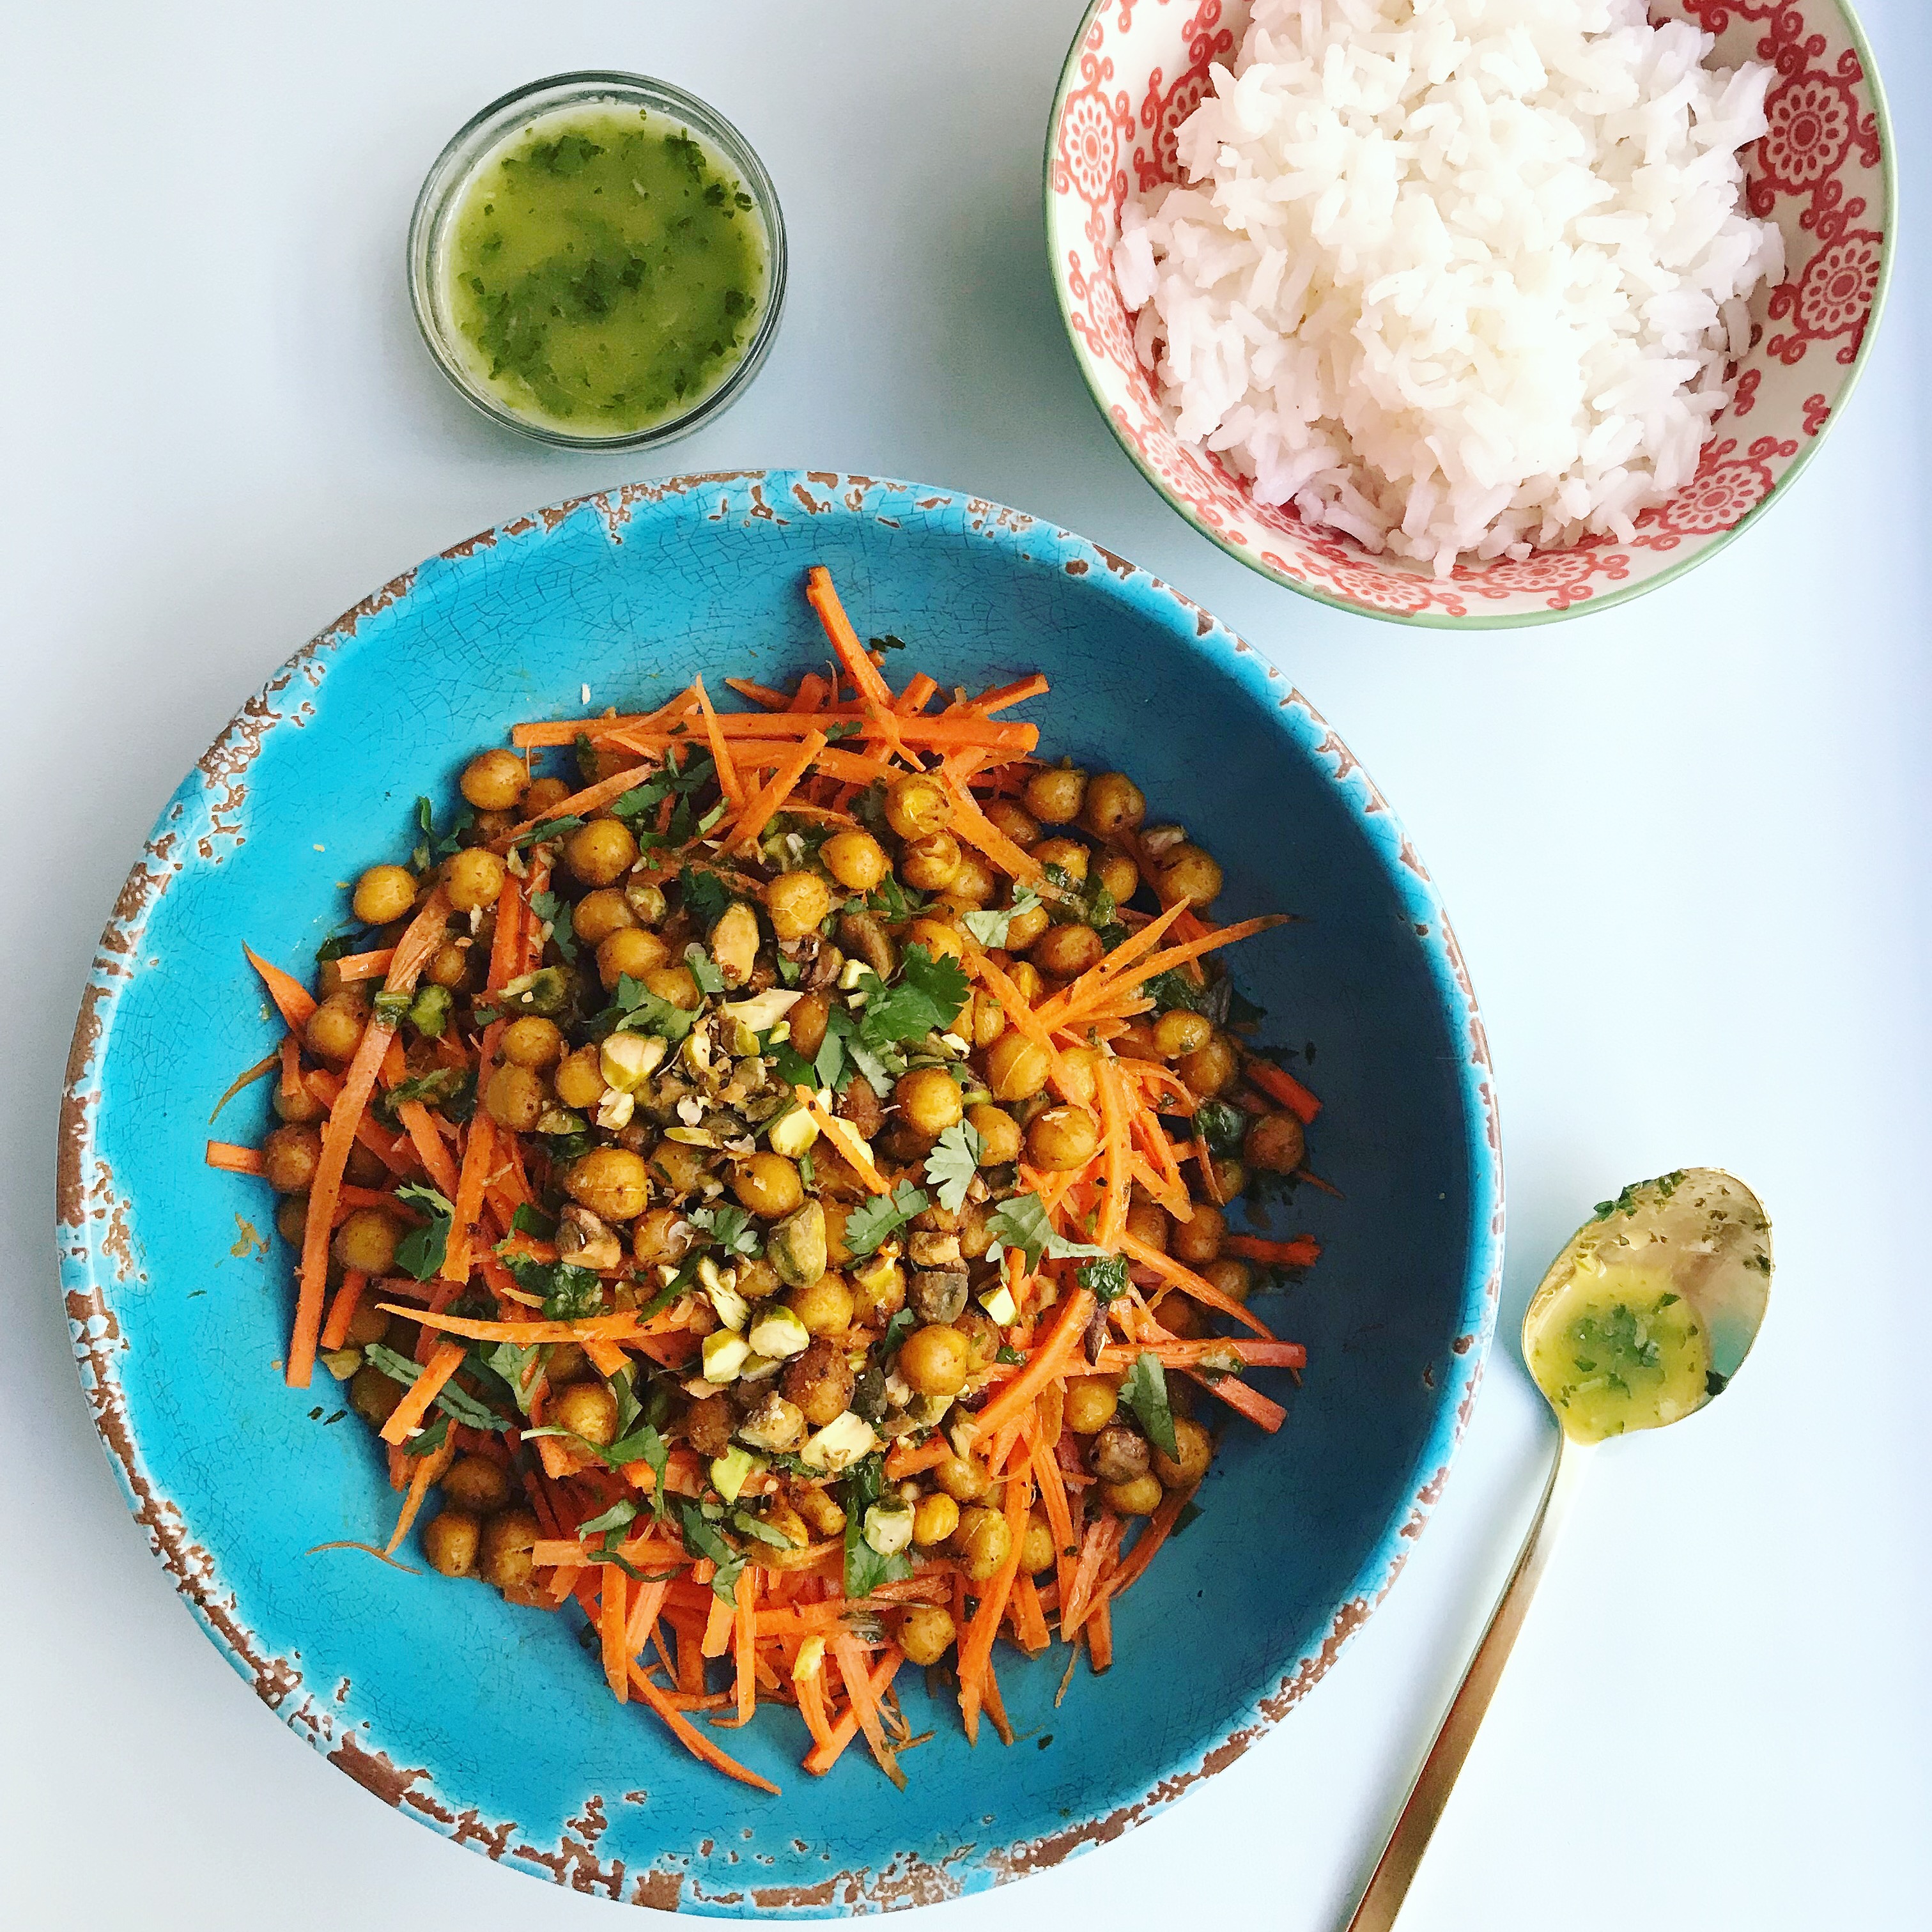 Roasted Chickpea, Carrot and Pistachio Salad